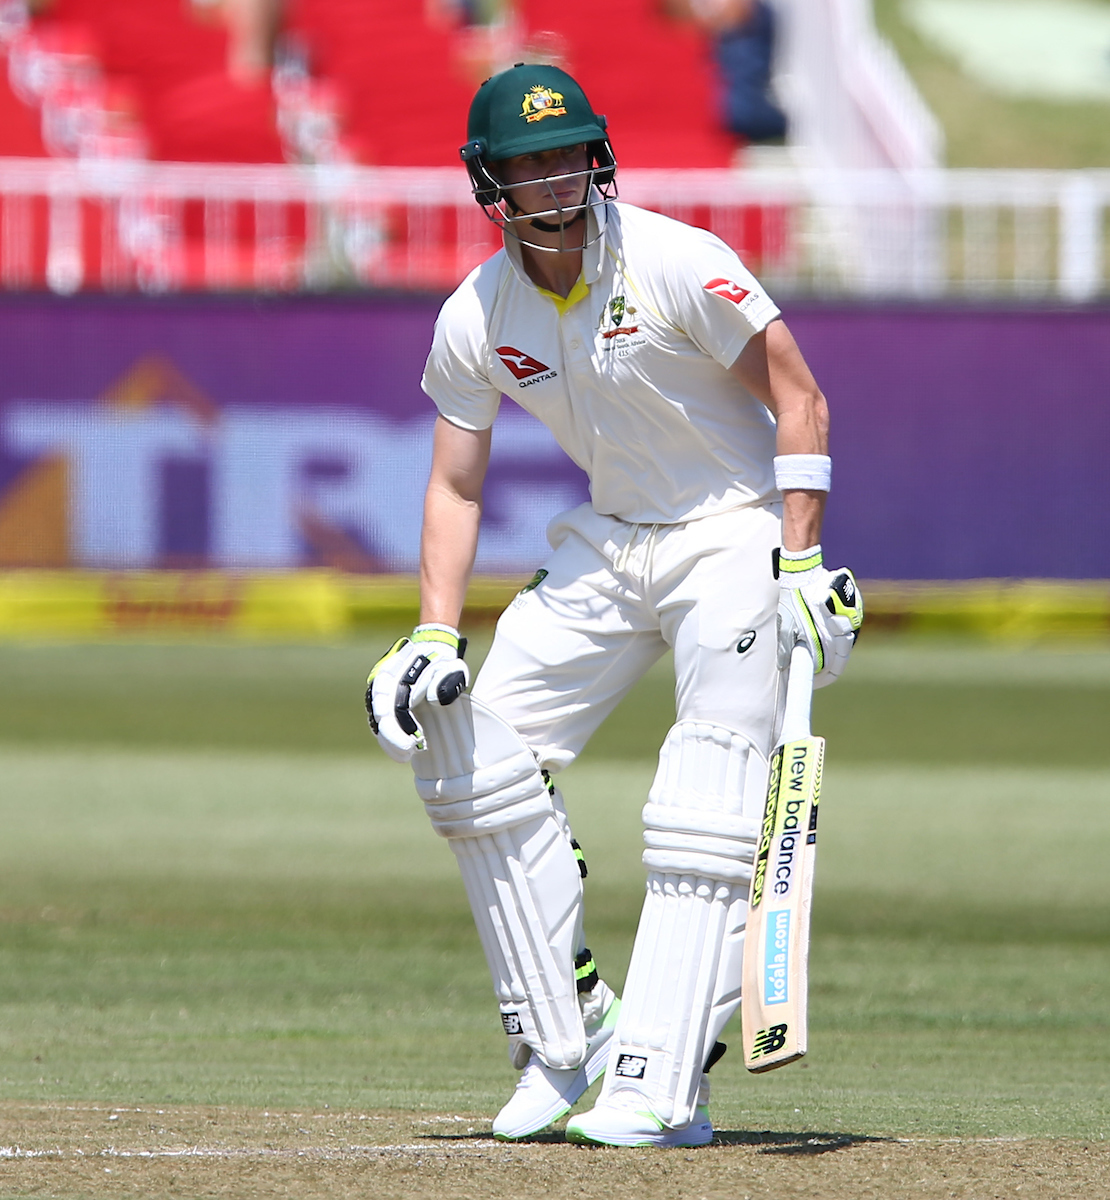 Steve Smith doesn't deserve a legacy dominated by tampering